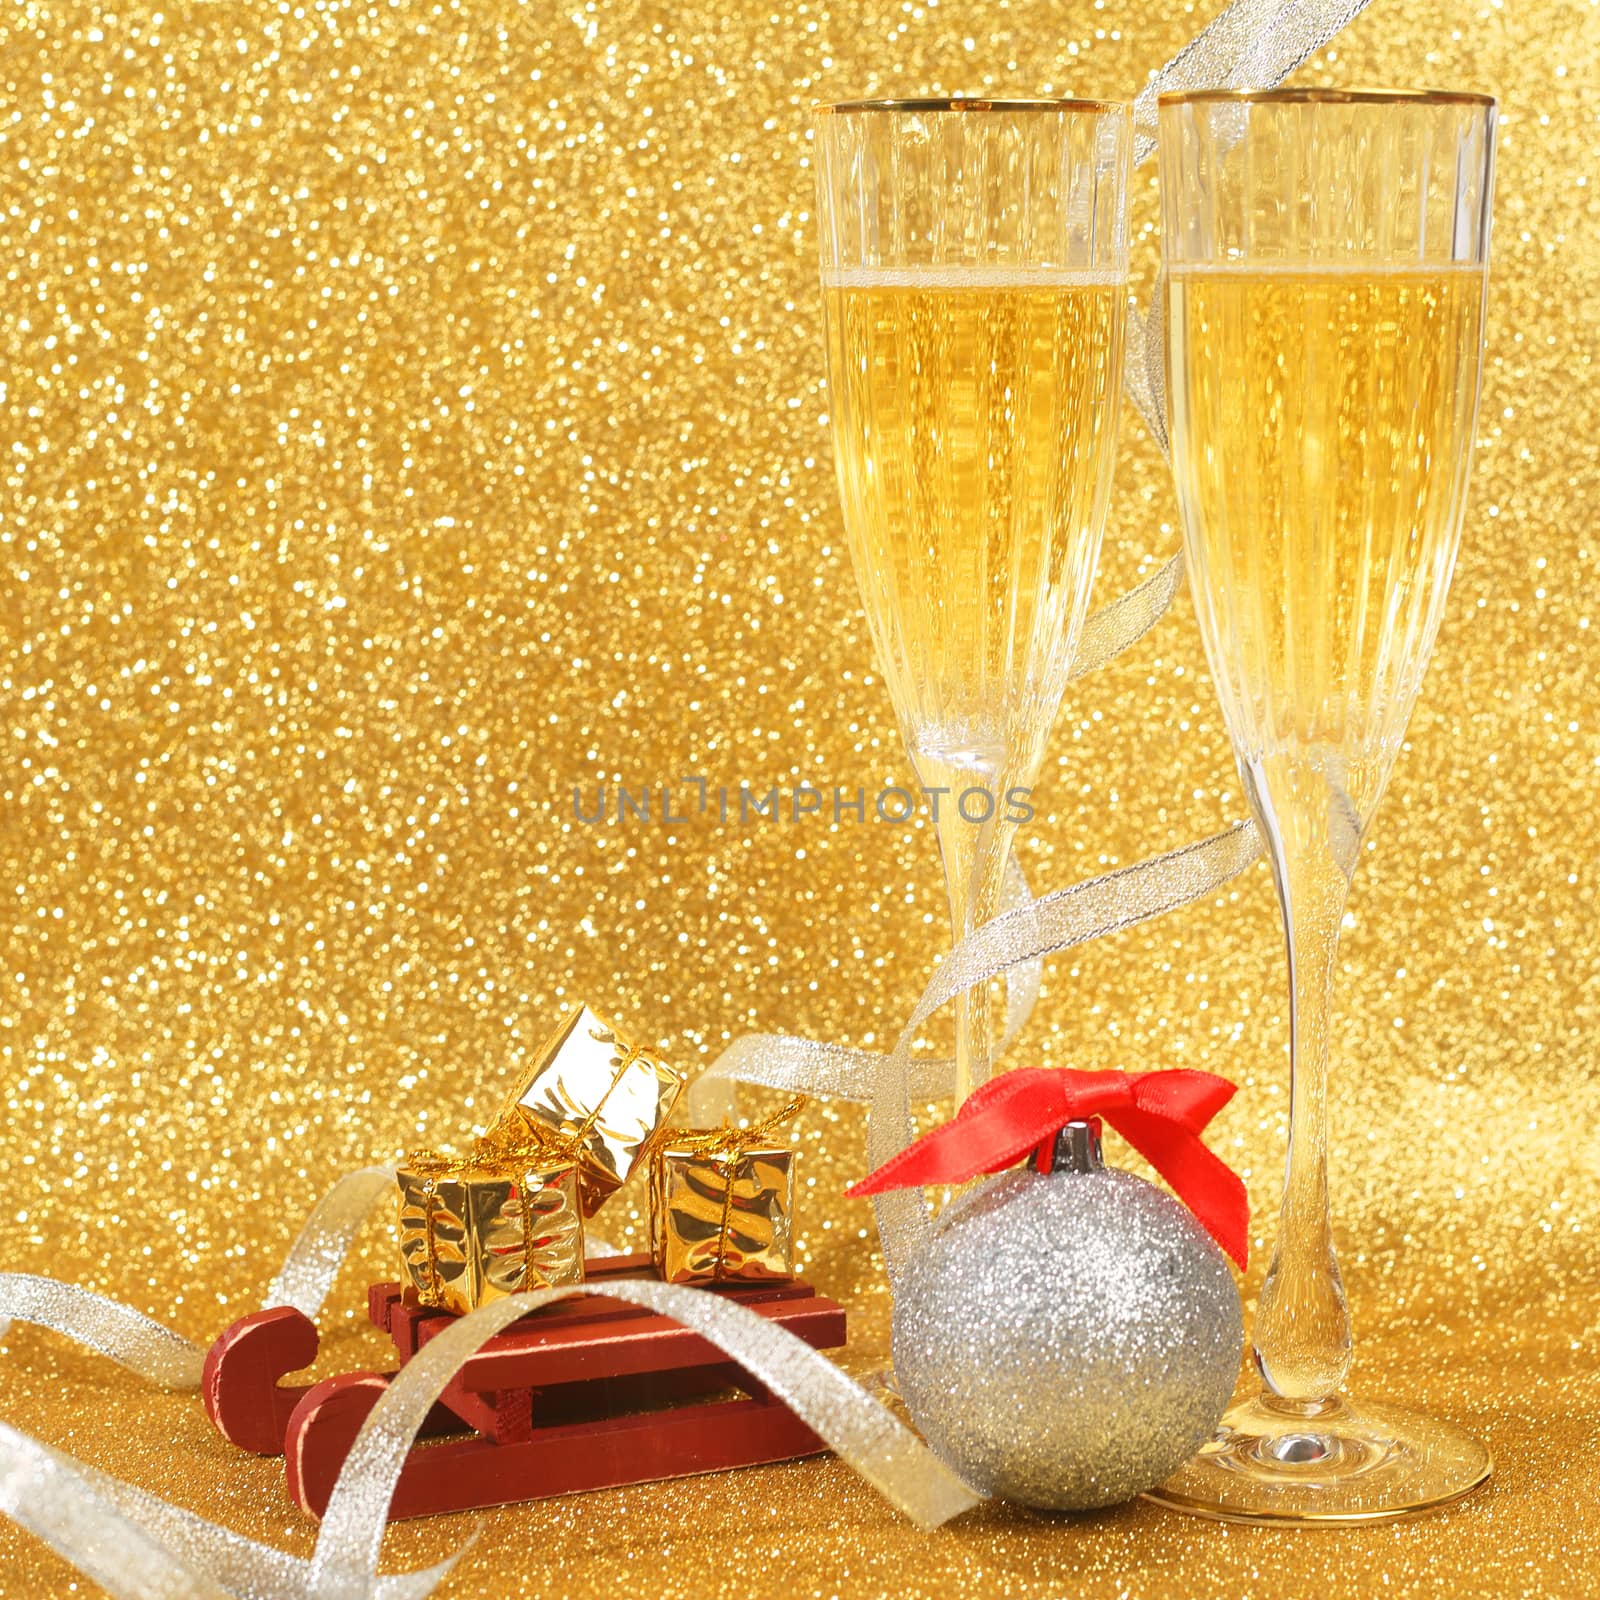 Two glasses of champagne with golden glitter lights on background